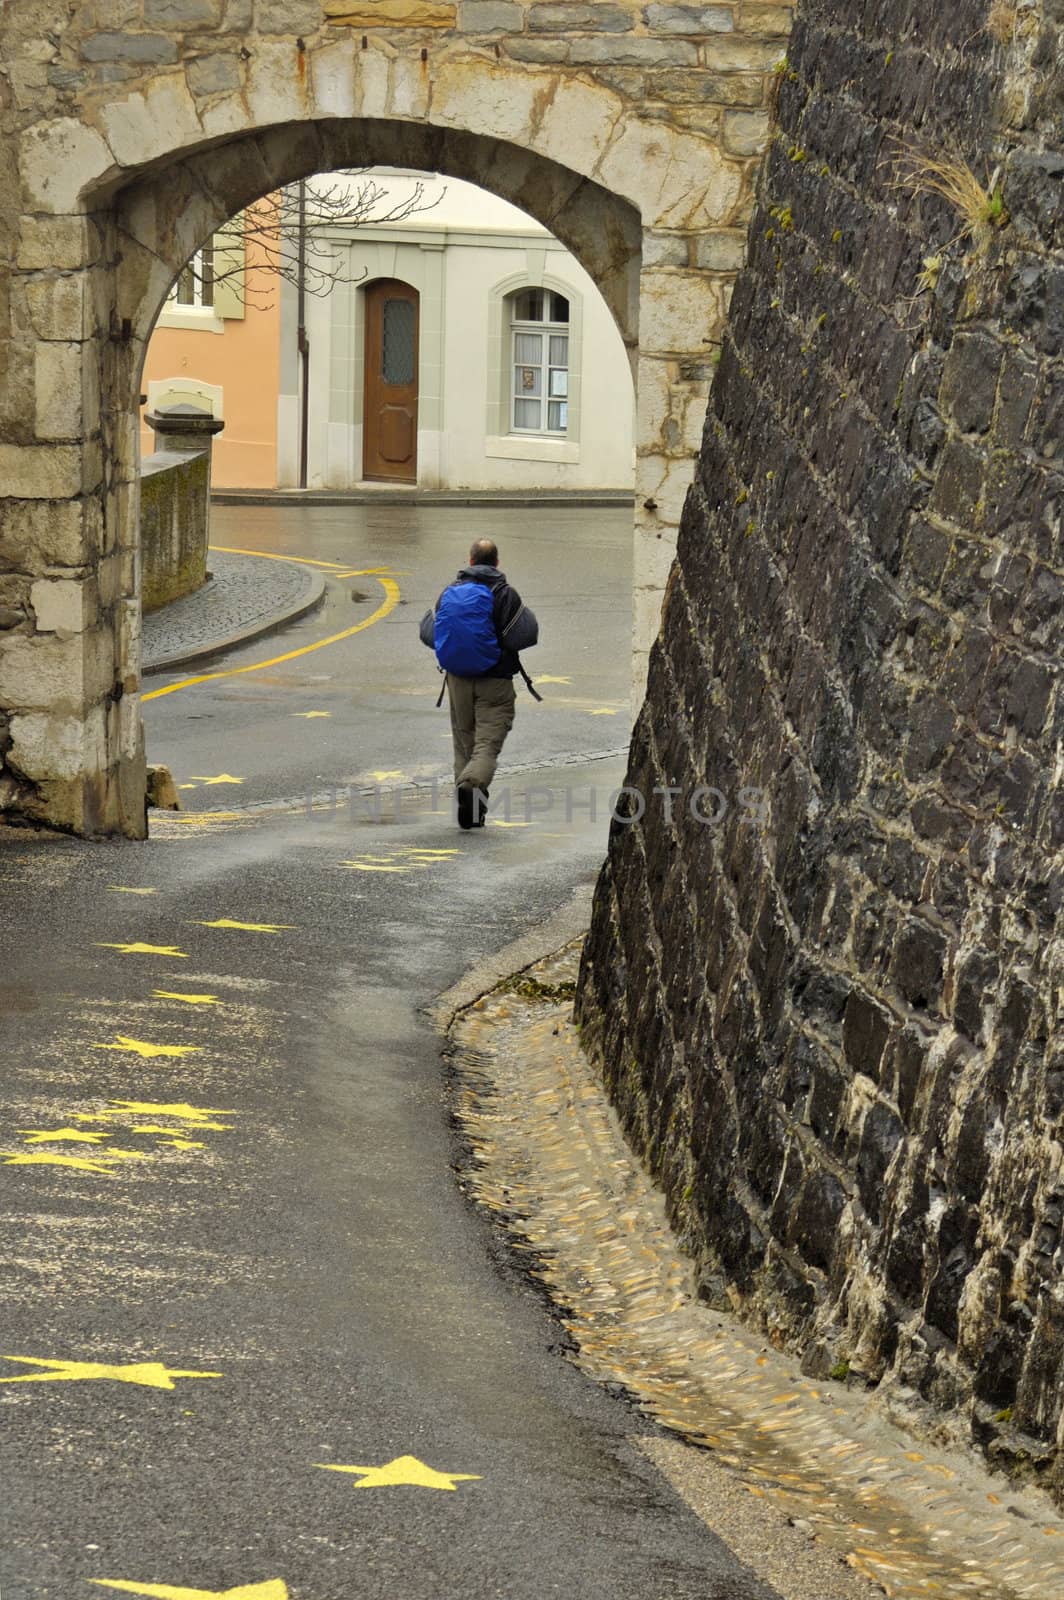 A hiker walks under the arch in the Swiss village of Aubonne on a wet day. Slight motion blur on his feet and backpack straps.